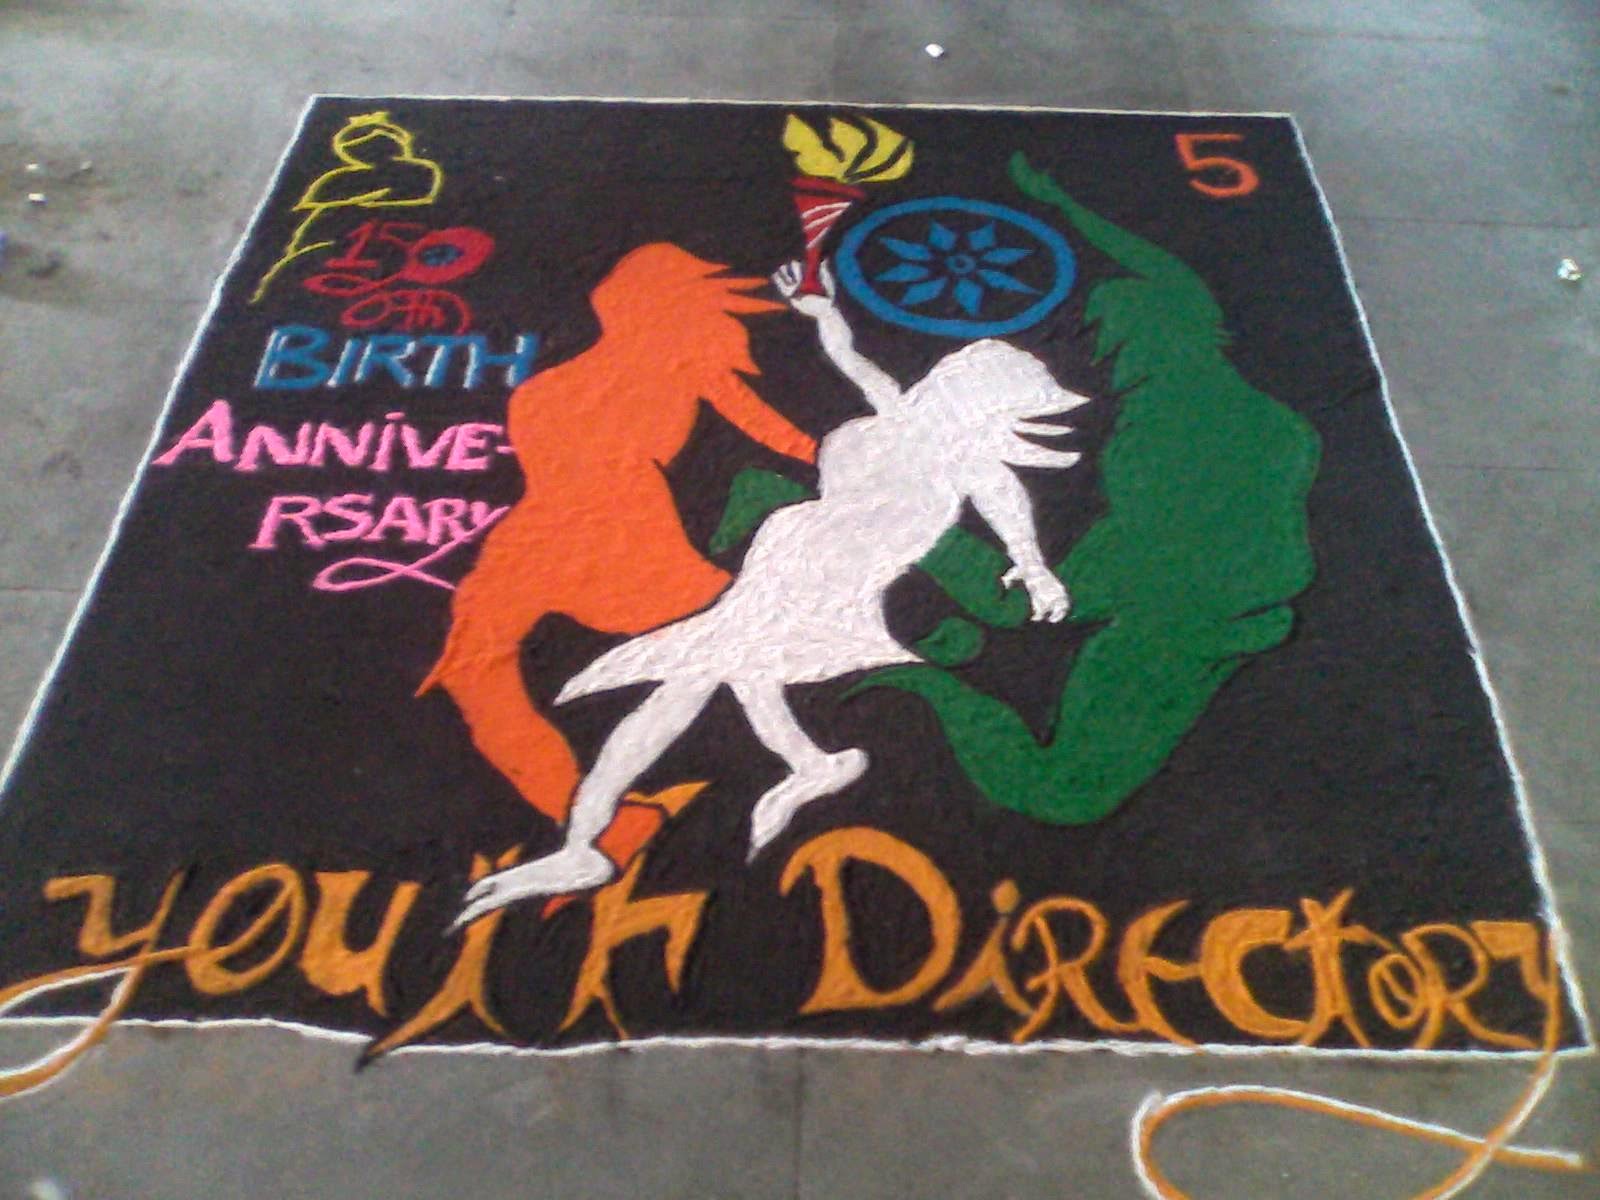 Rangoli designs for competition with themes of youth